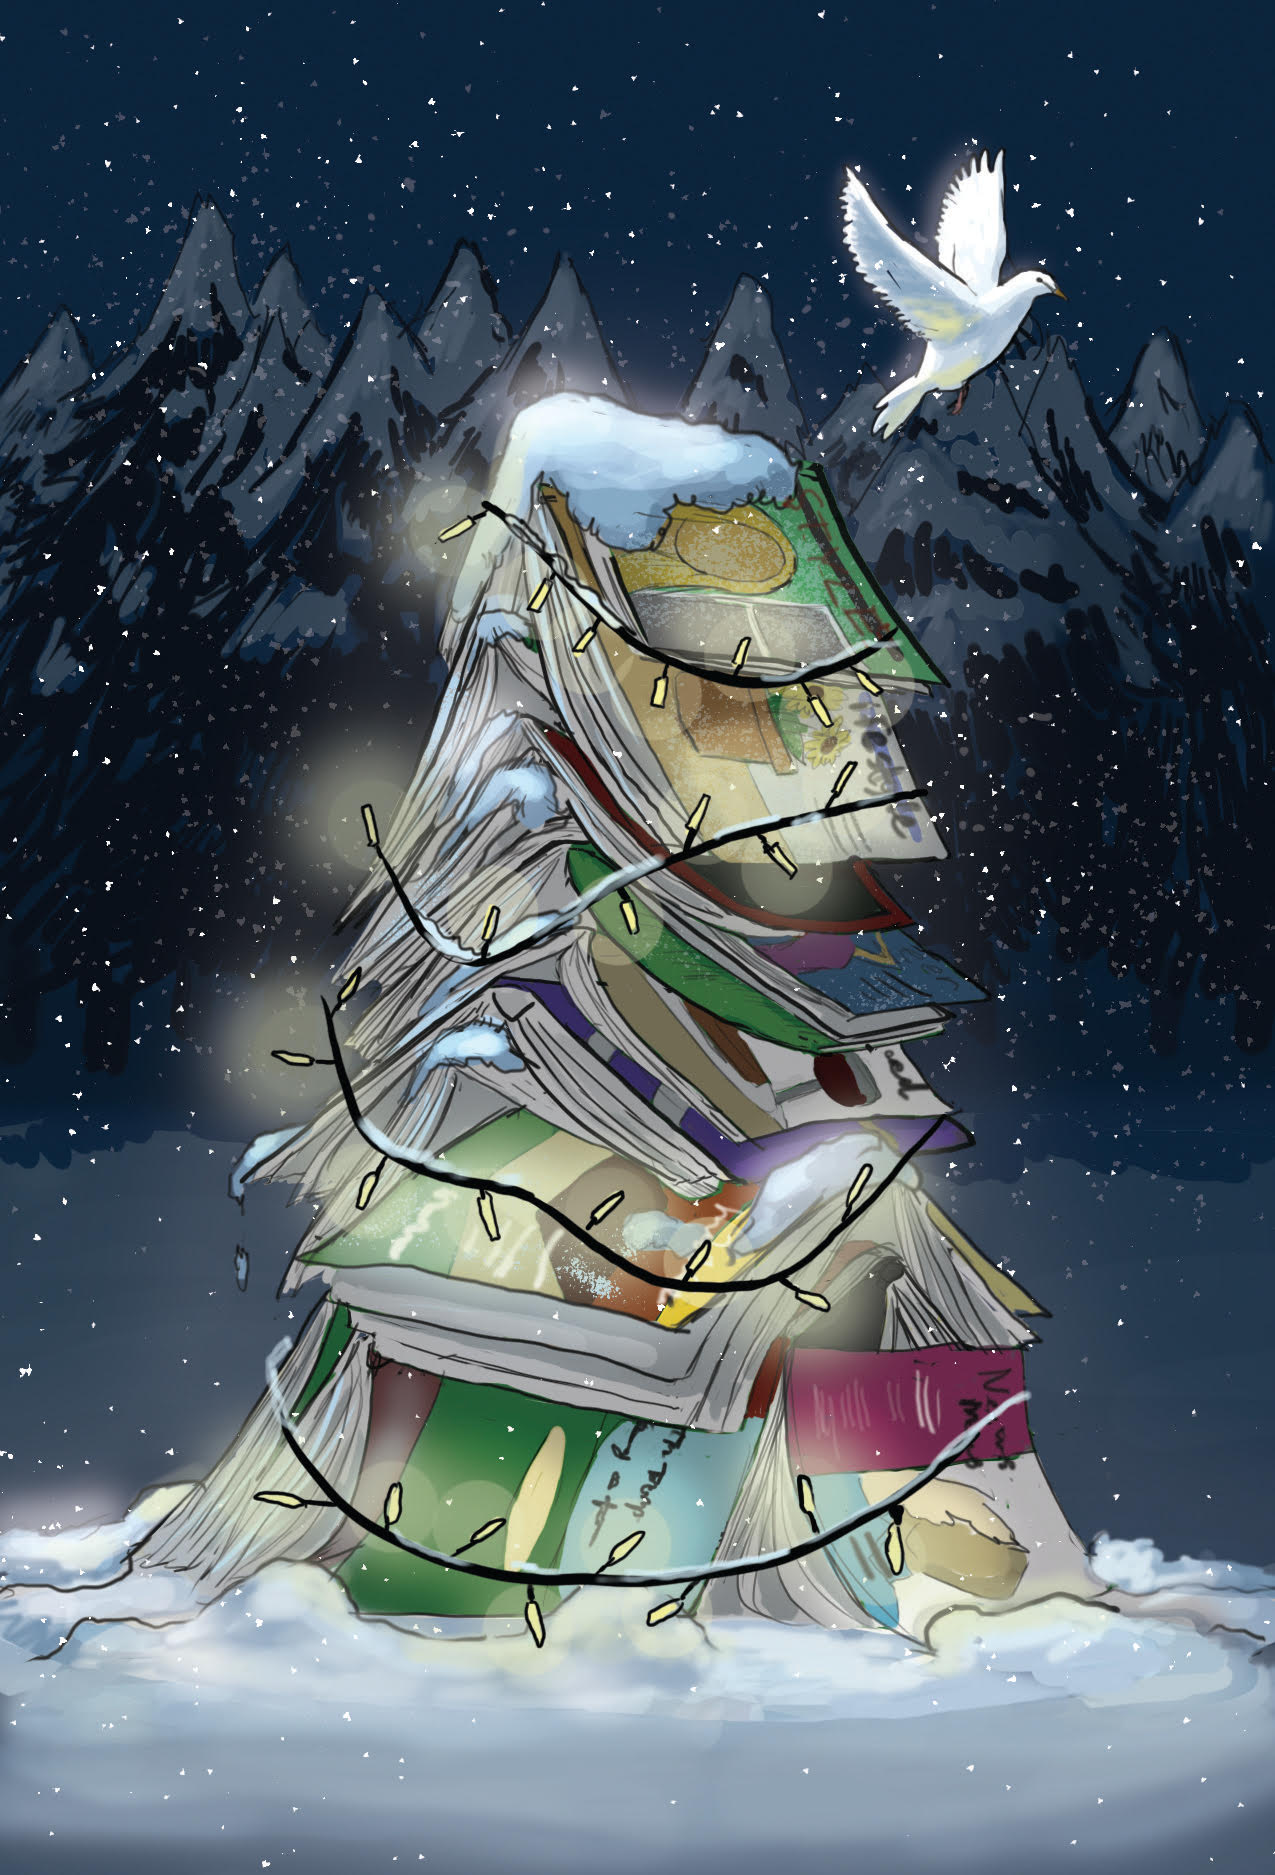 Custom illustration created for clients holiday greeting card